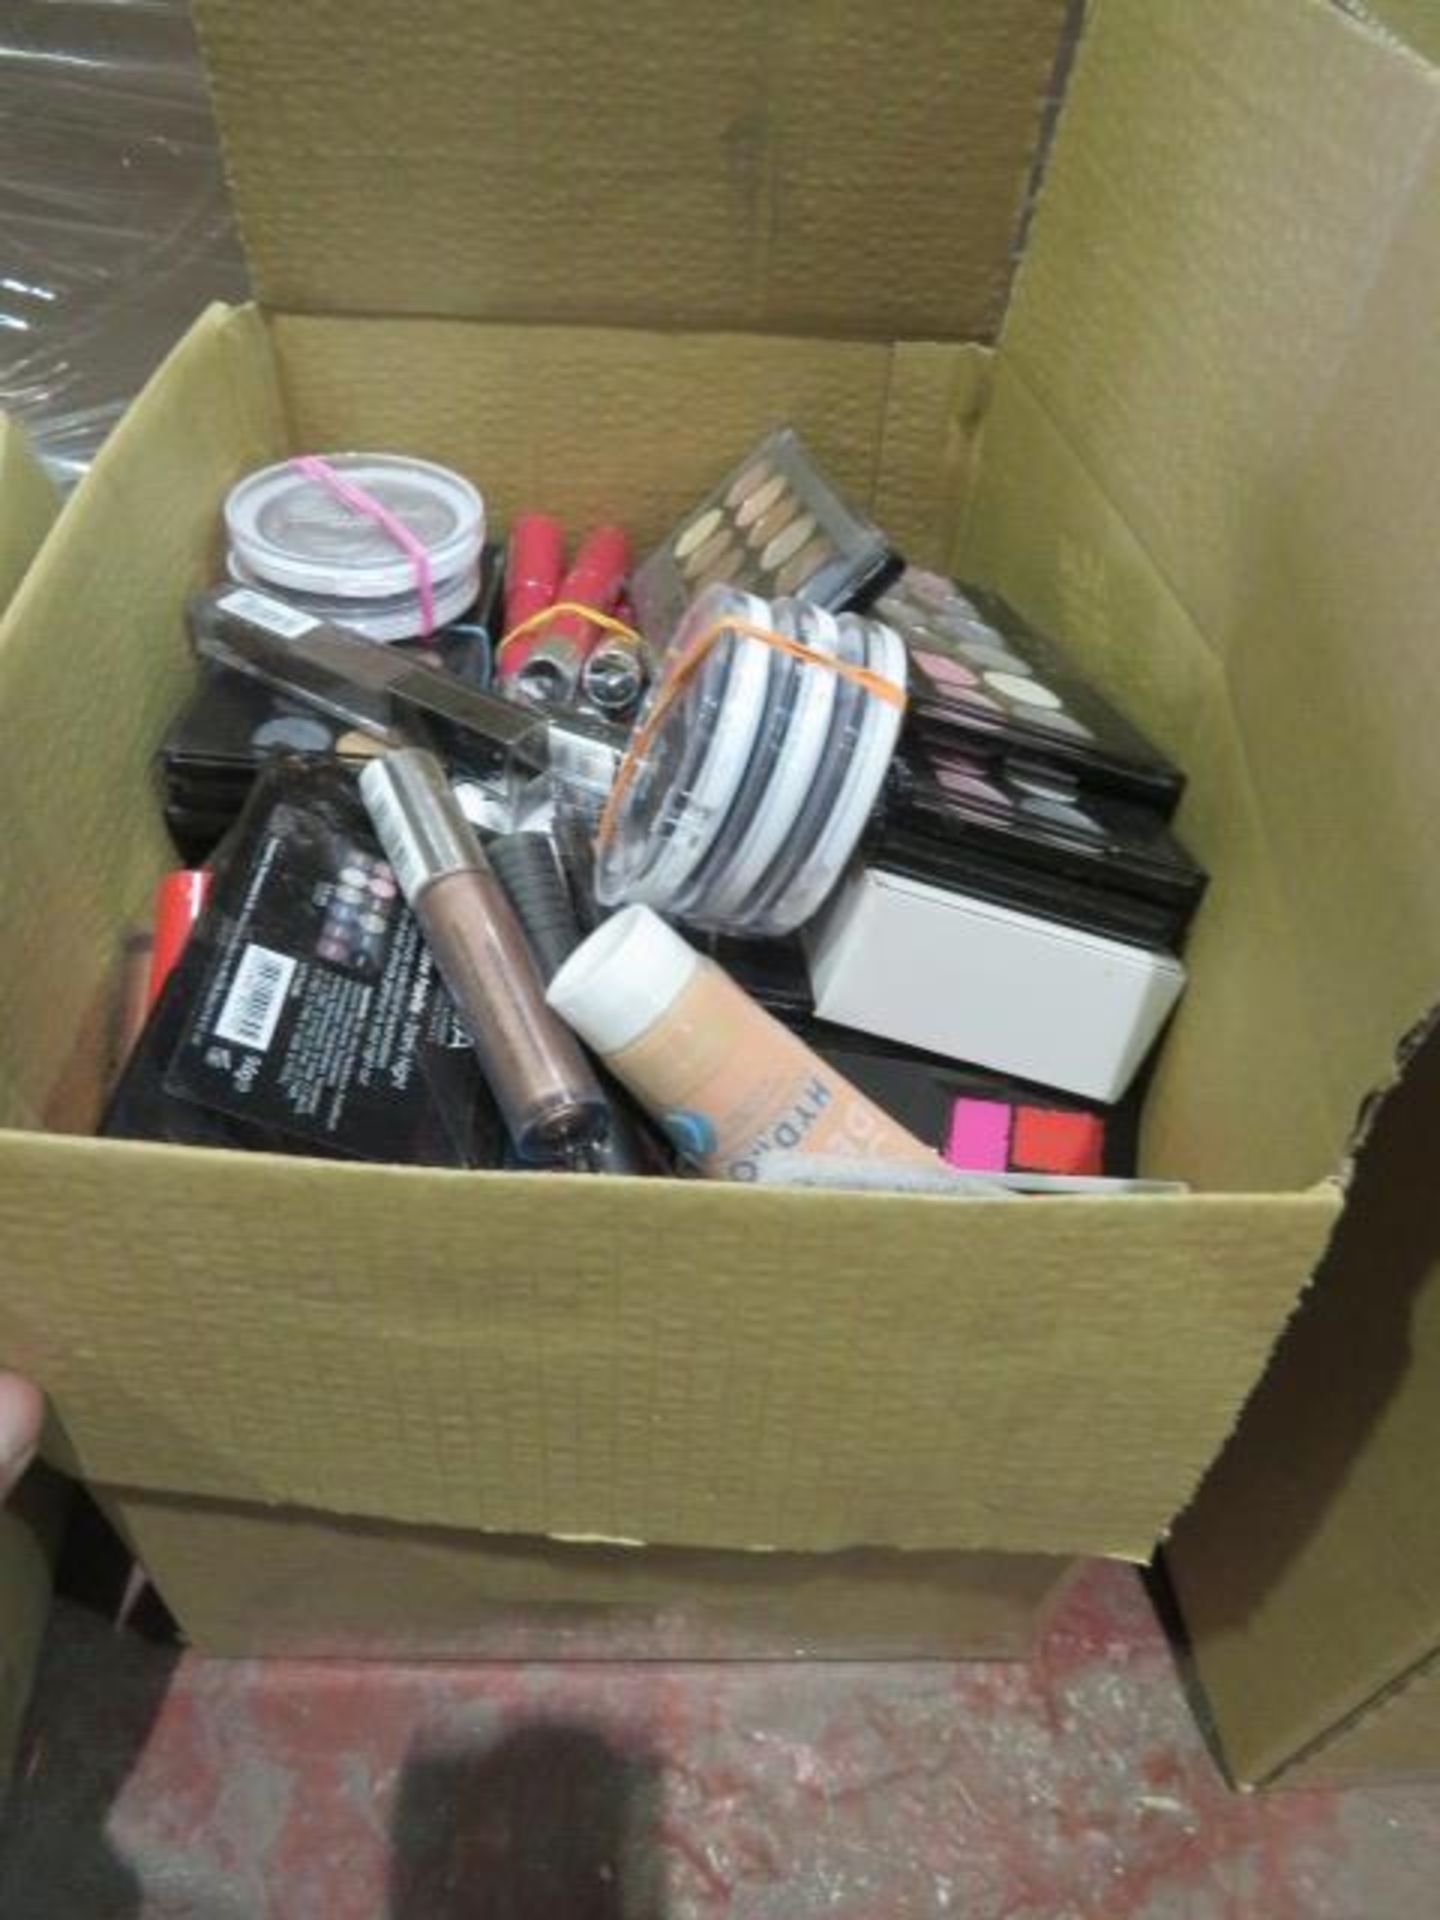 Circa. 200 items of various new make up acadamy make up to include: and much more. UK postage a... - Image 2 of 2